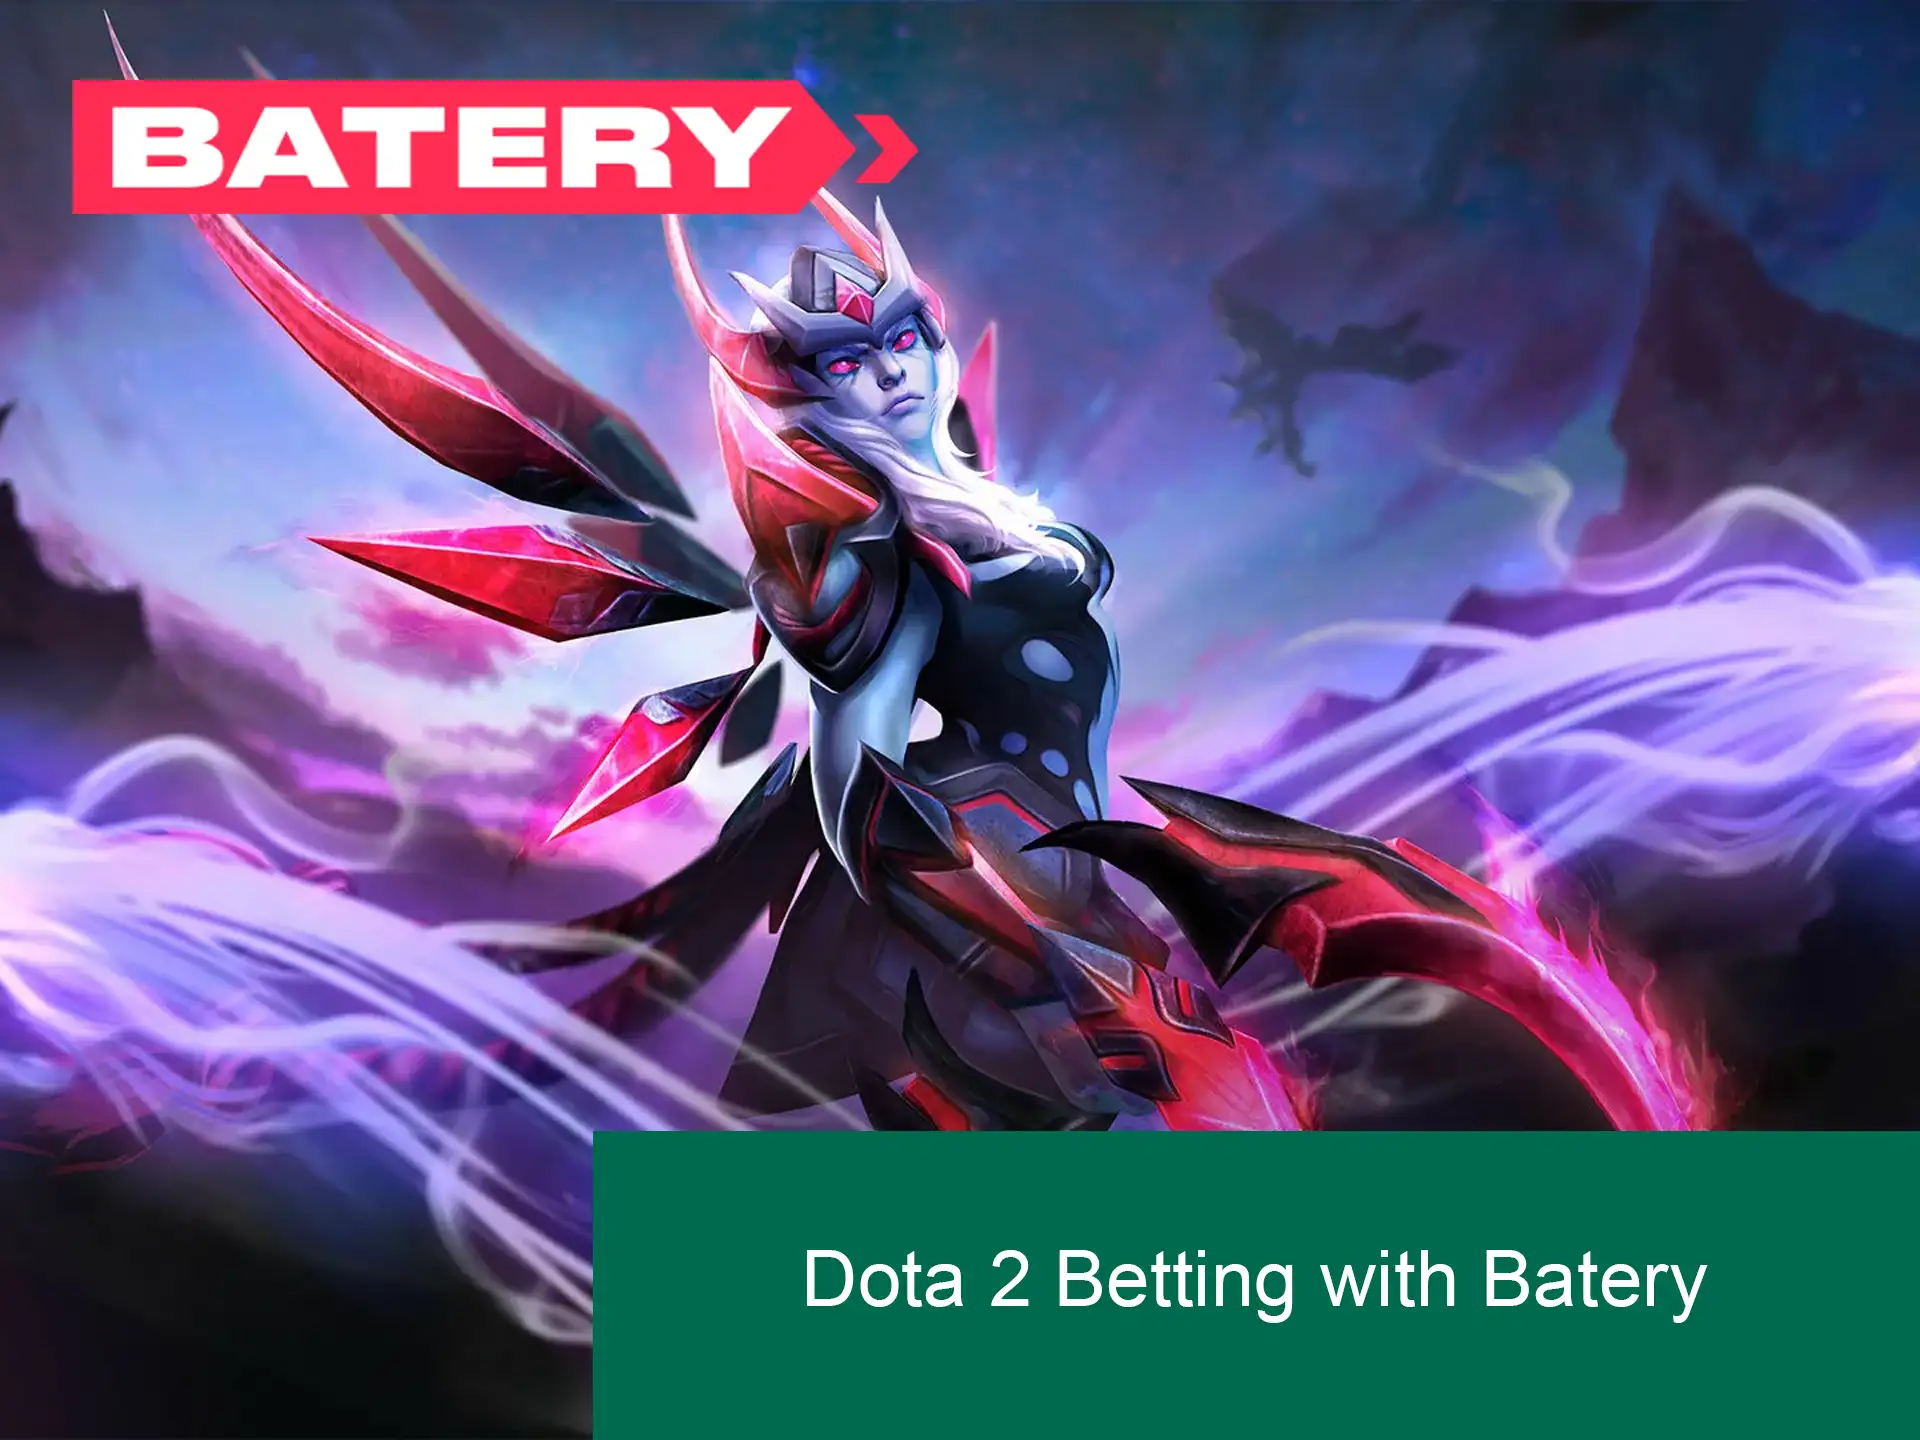 Bet with Batery on Dota 2 and get a first deposit bonus for new players.